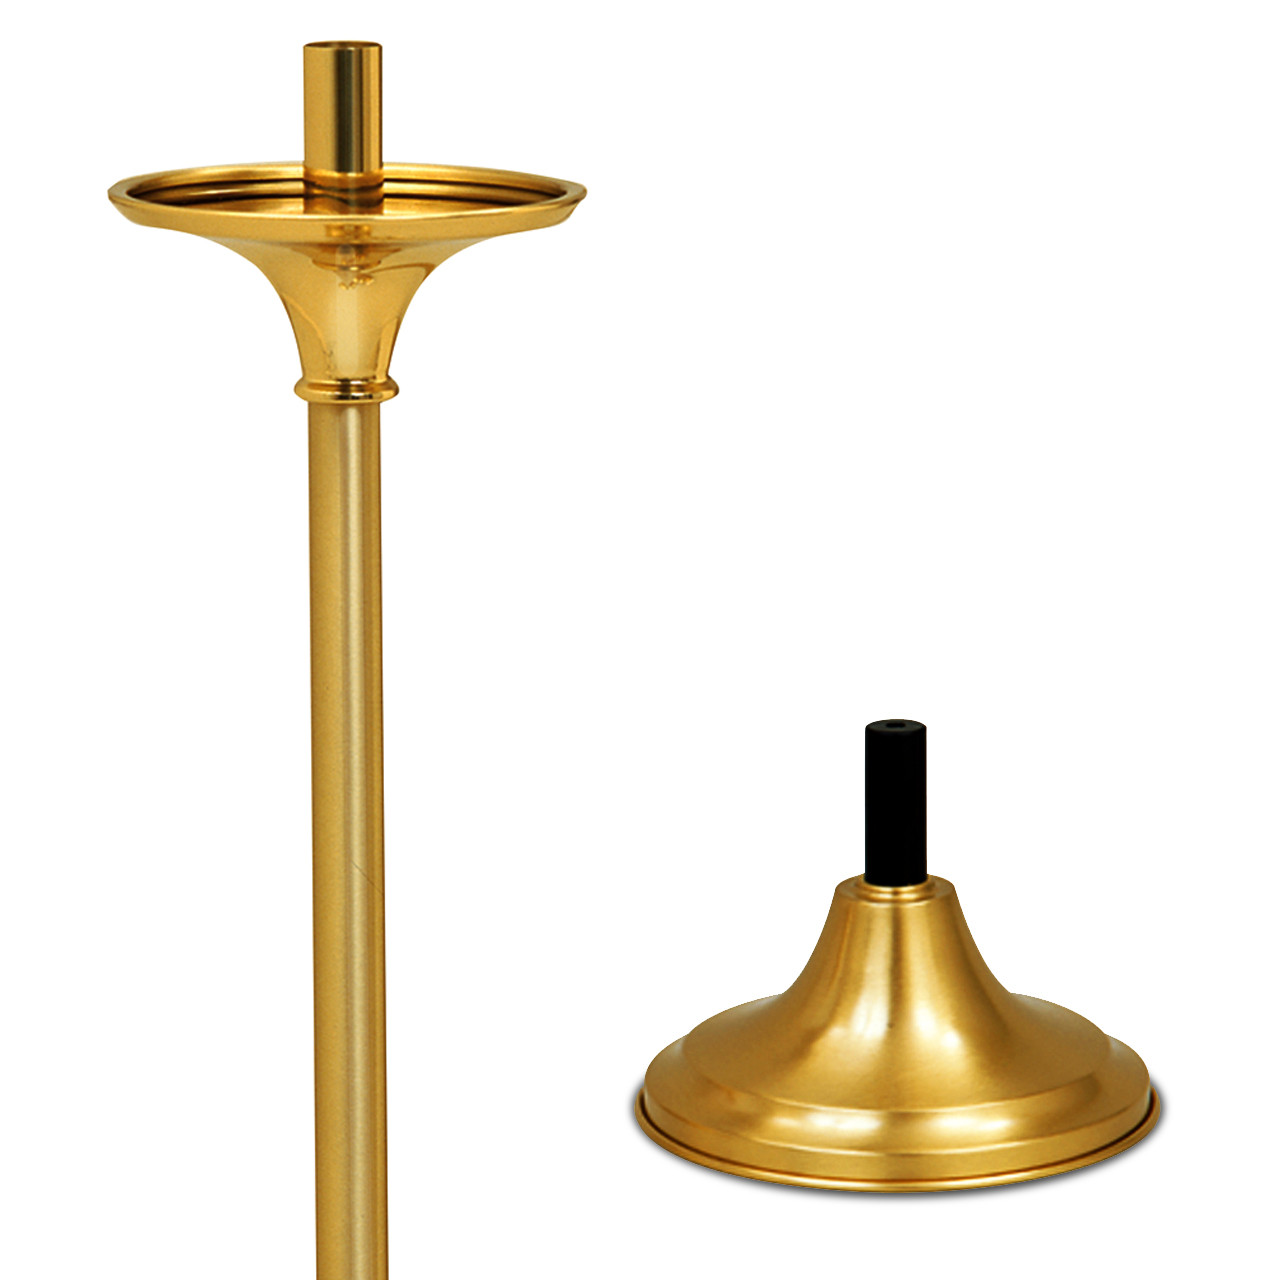 K237 Processional Torch and Base